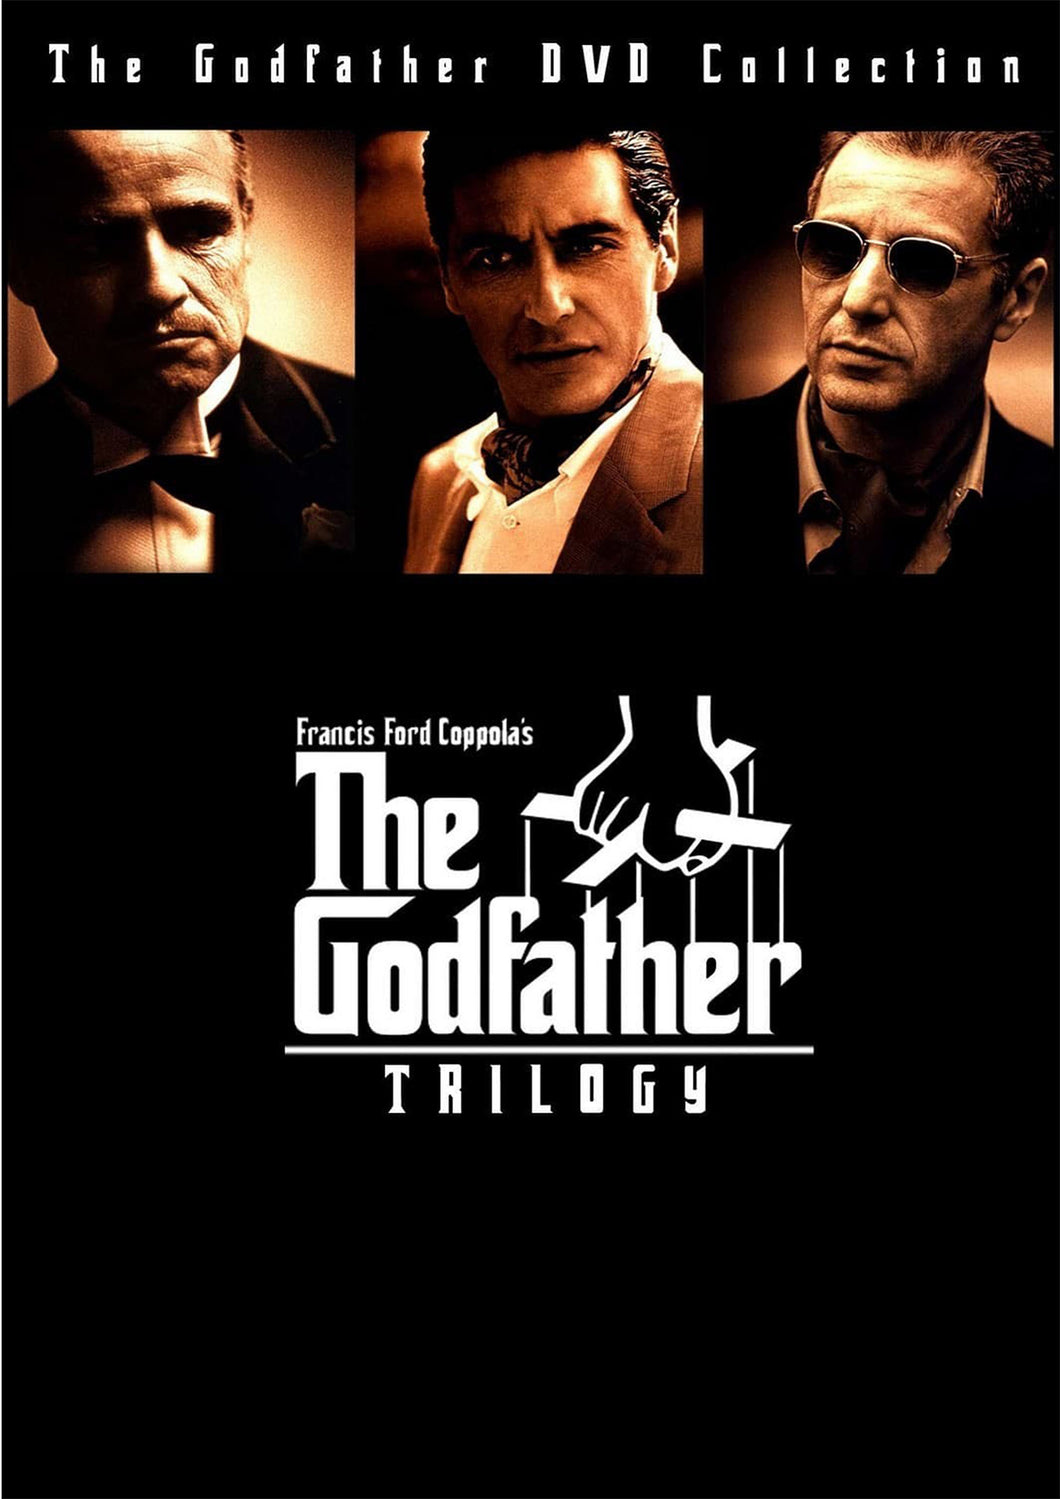 The Godfather Movie Poster High Quality Glossy Paper A1 A2 A3 A4 A3 Framed A4 Framed